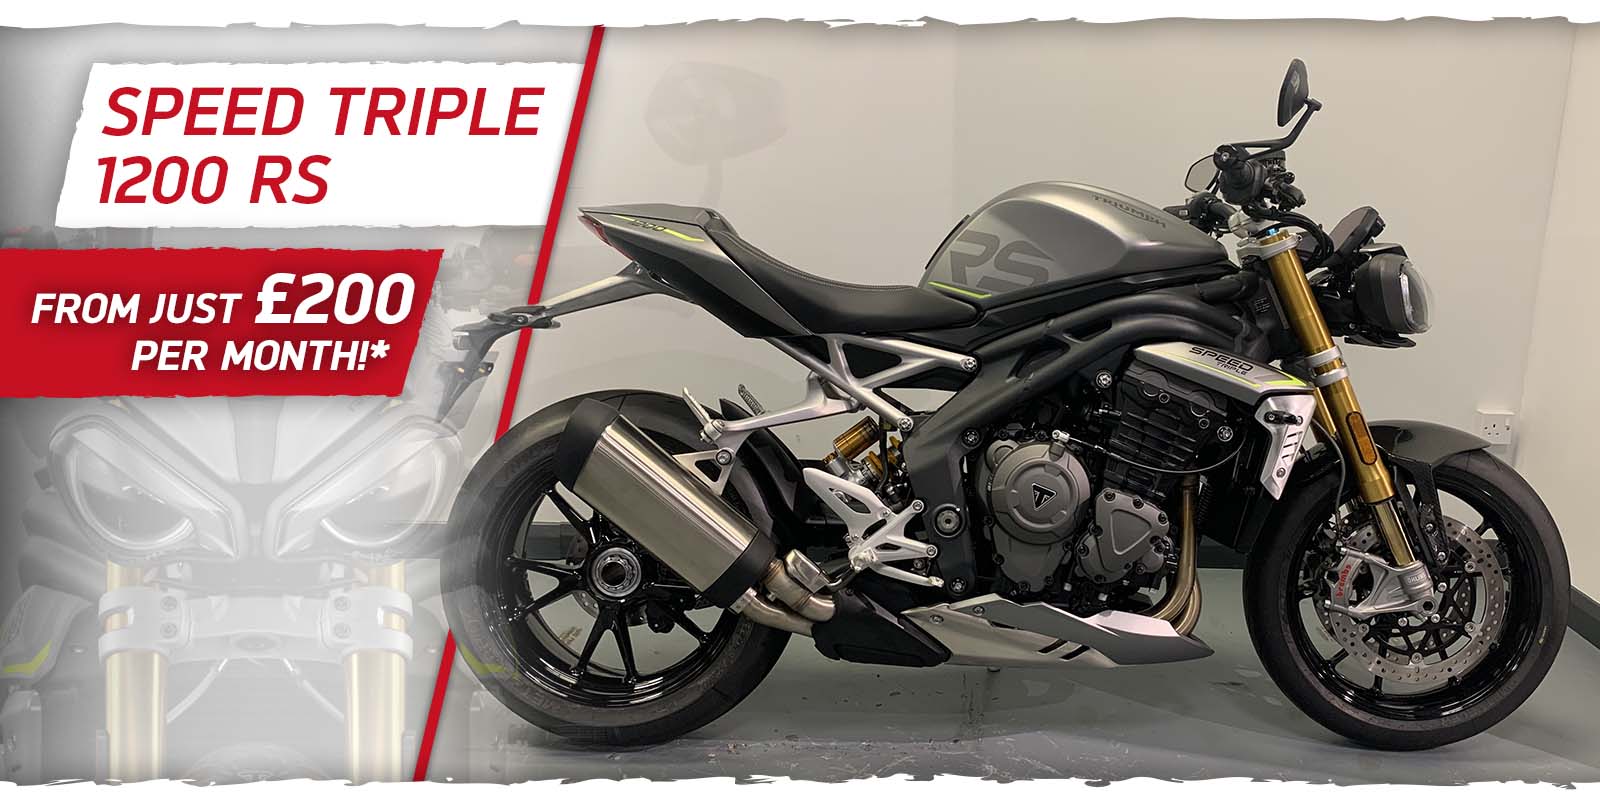 Laguna Triumph Speed Triple 1200 RS Motorcycle Offer